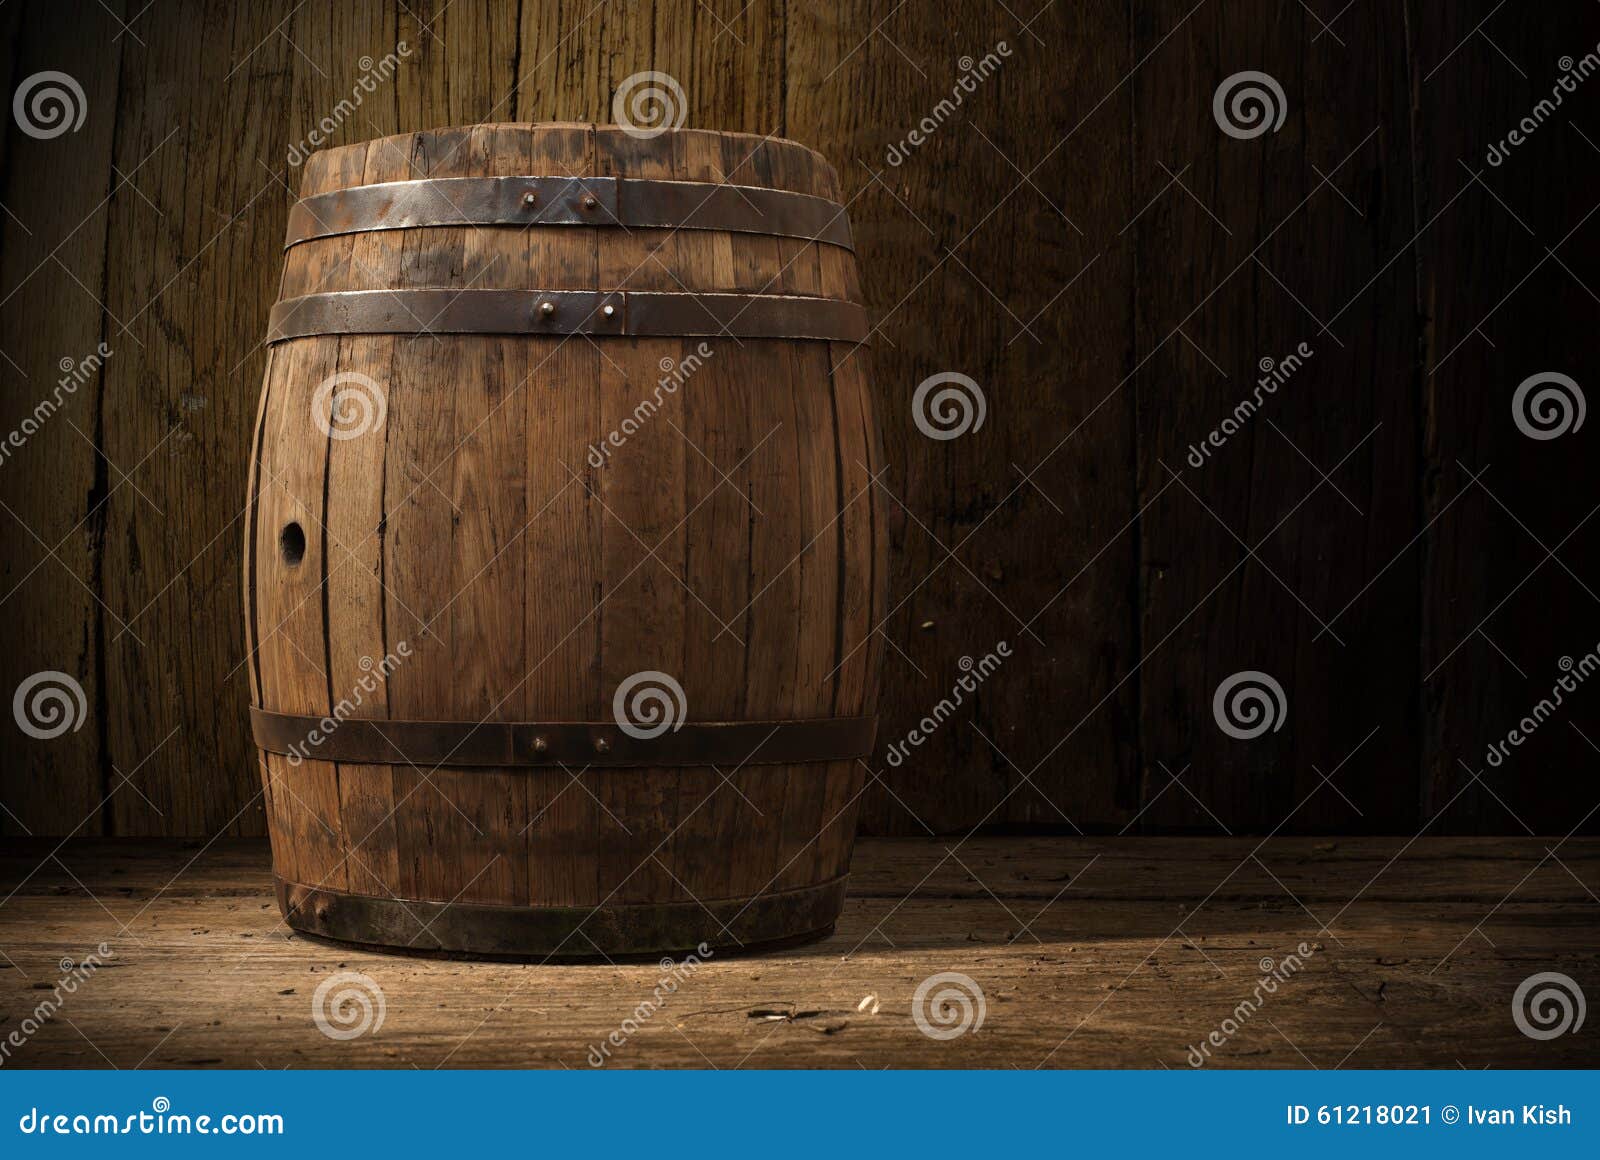 background of barrel alcohol vinery wood